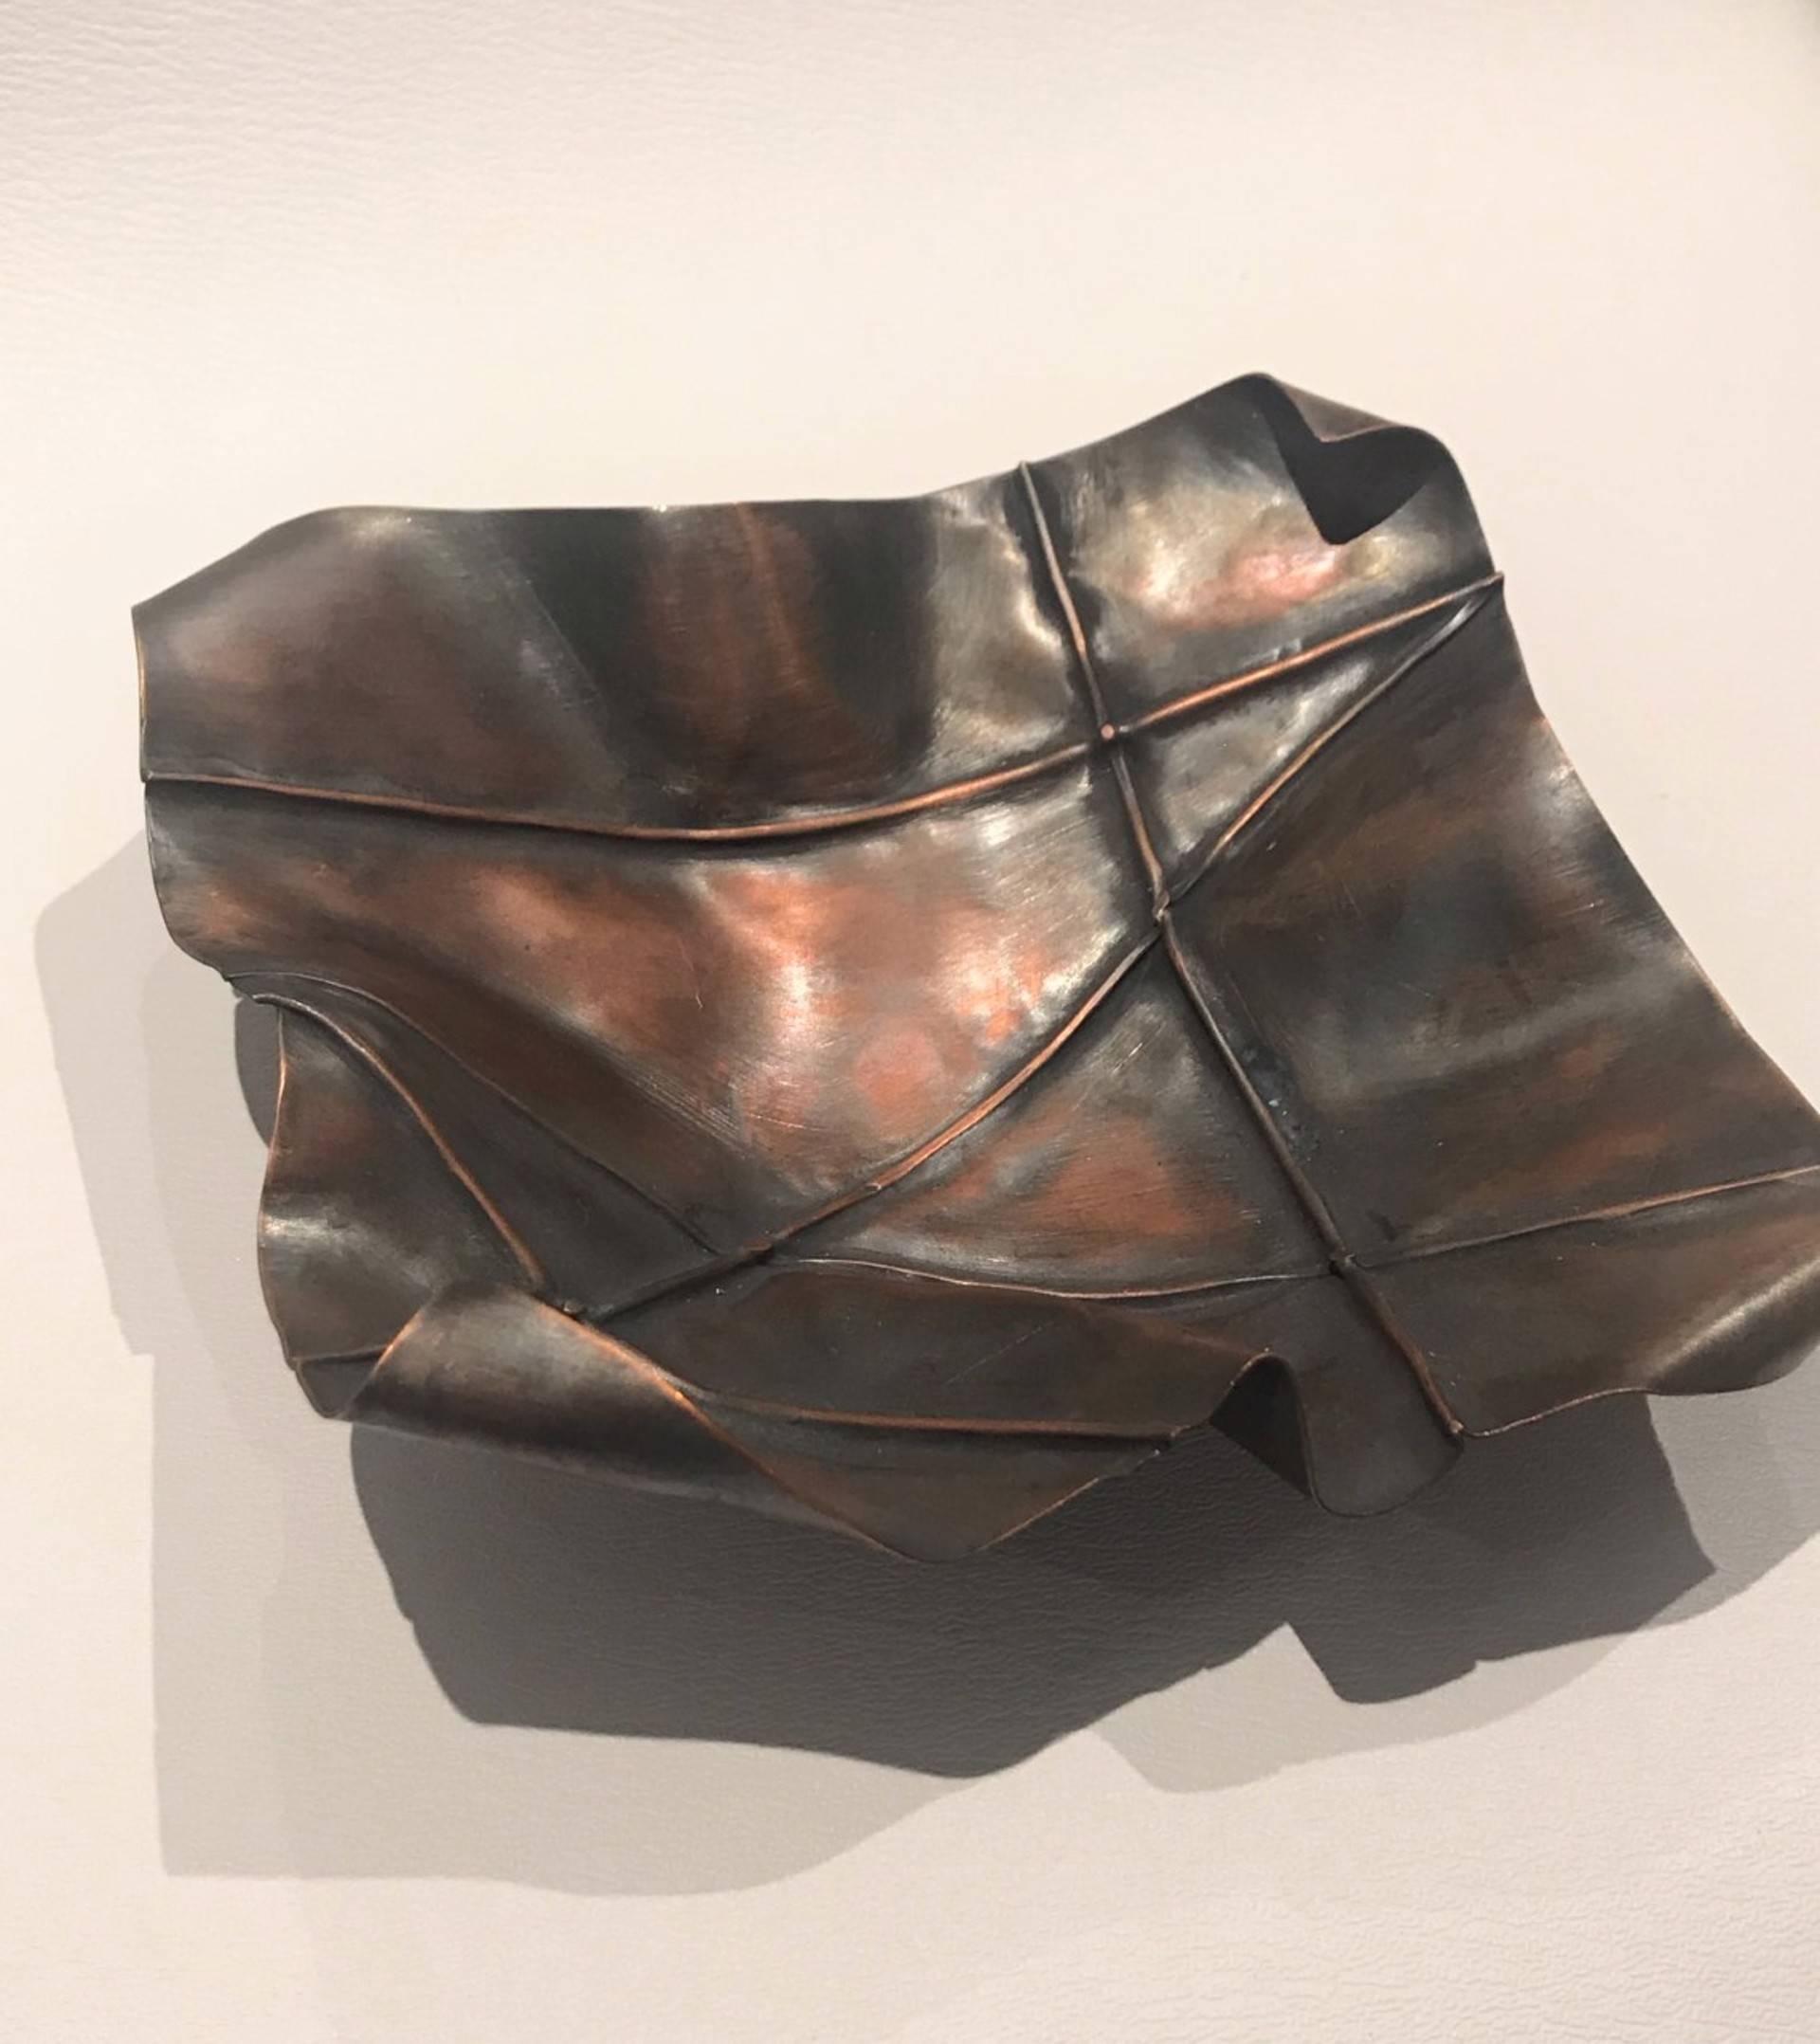 "Square Copper Bowl with Folds" by Nicole Josette